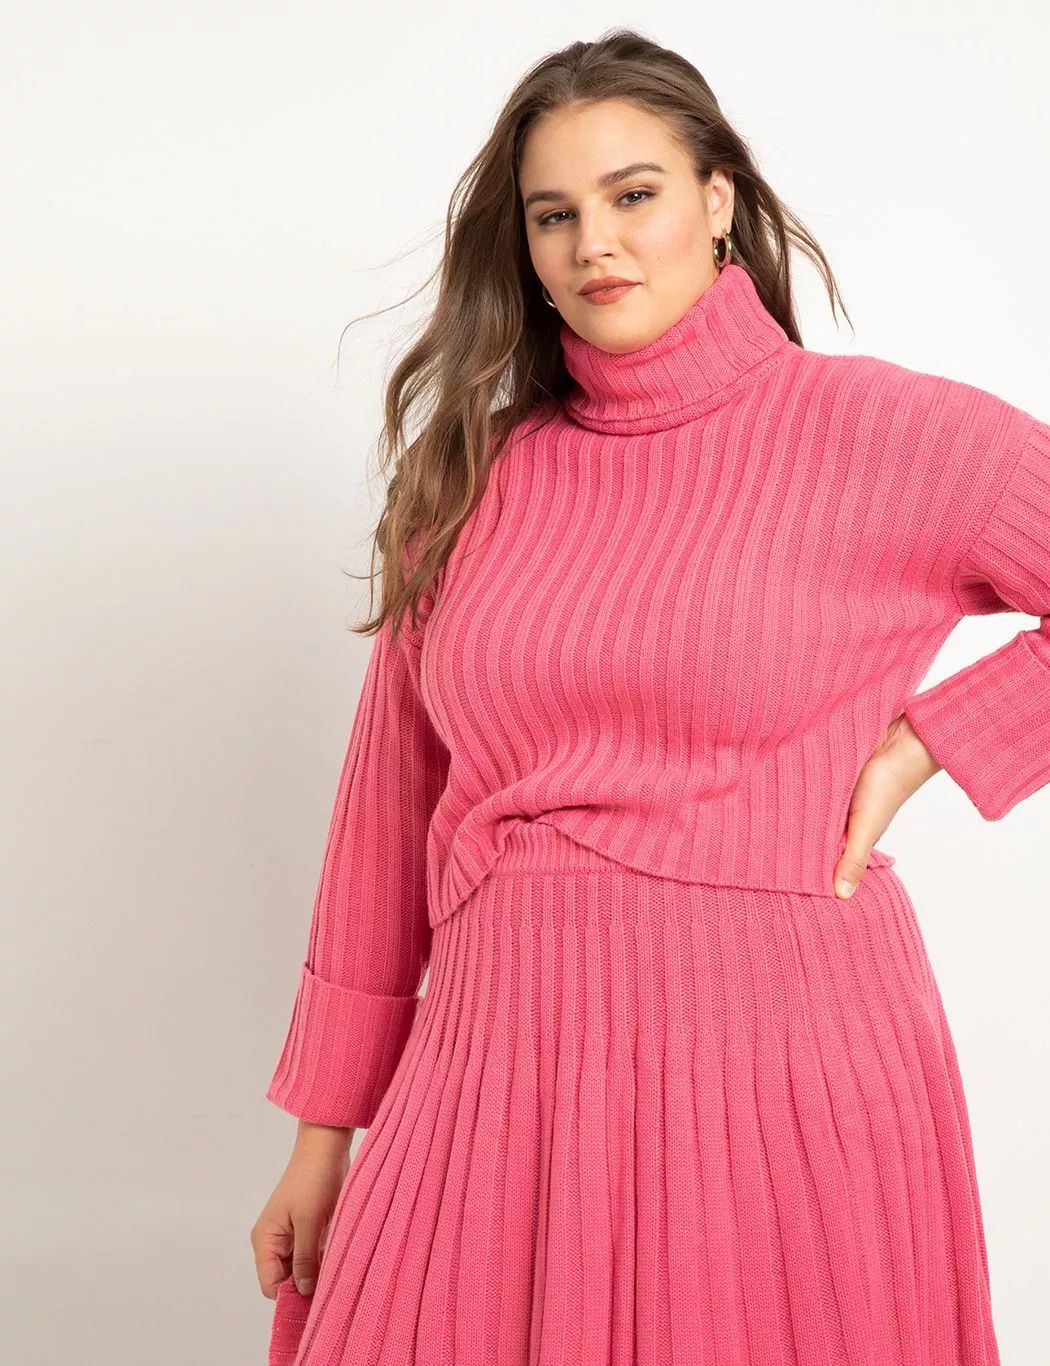 Cropped Turtleneck With Roll Cuff | Women's Plus Size Tops | ELOQUII | Eloquii